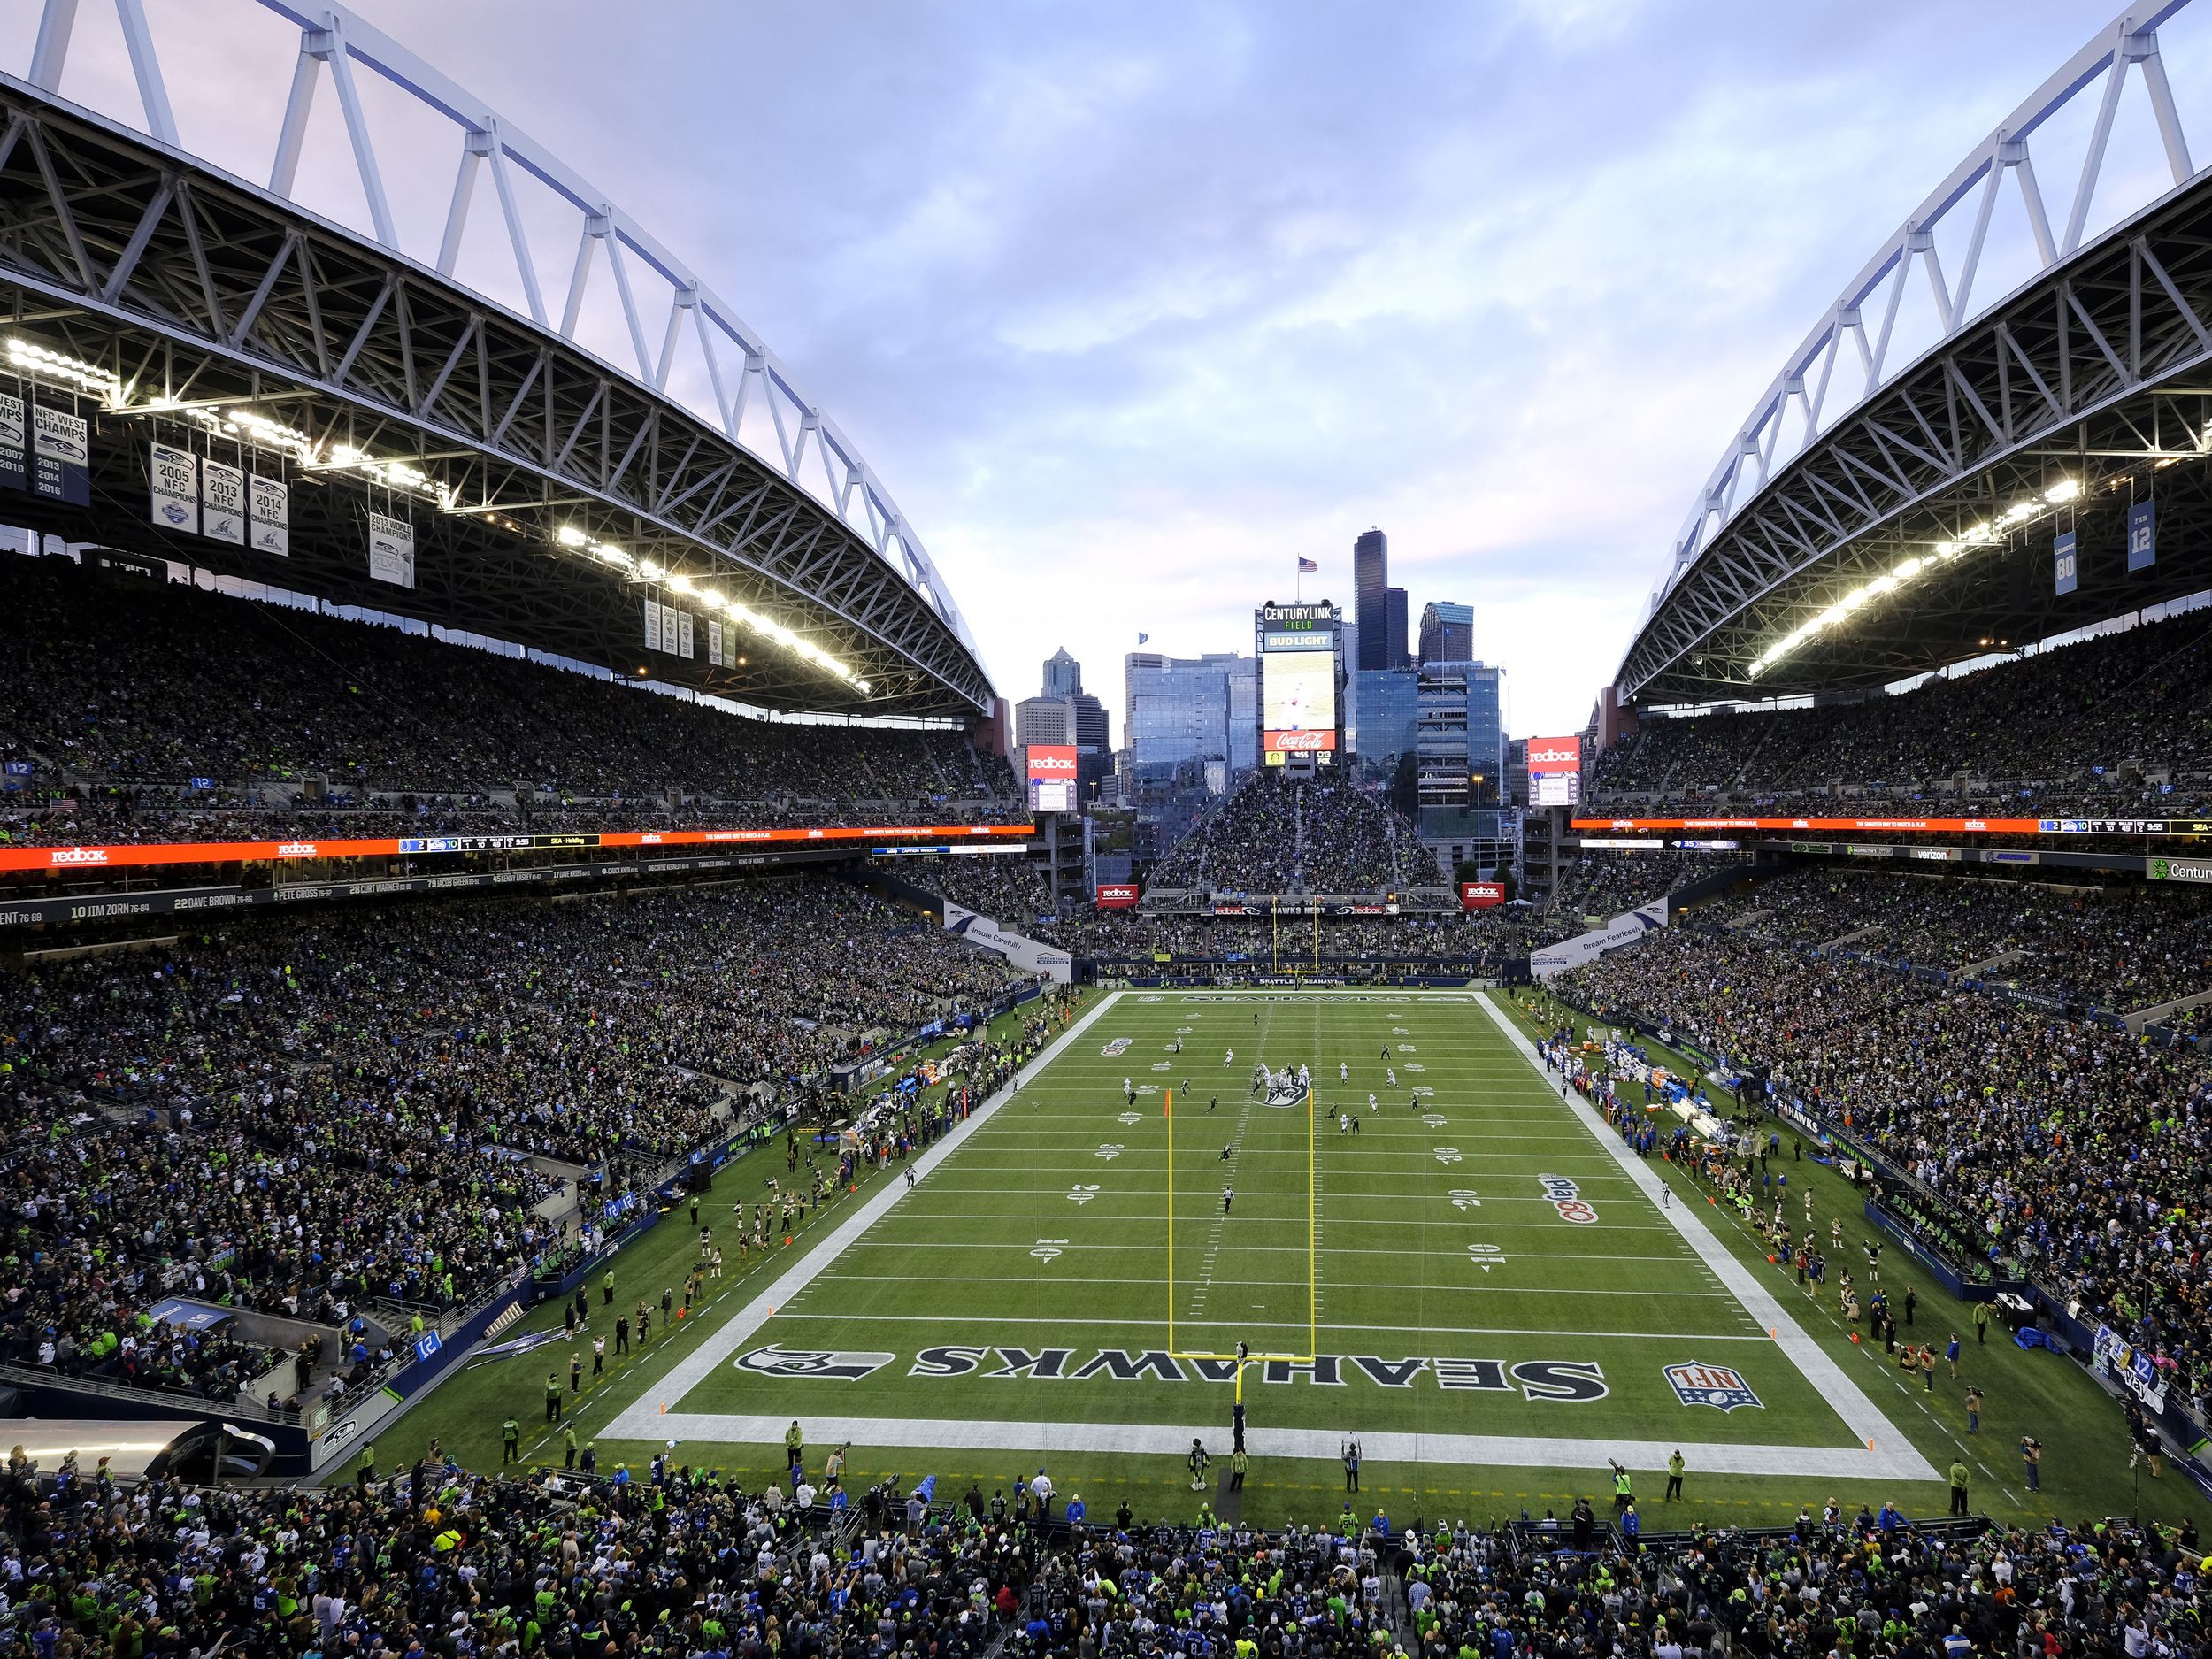 Seahawks tickets are available for Sunday's game for traveling